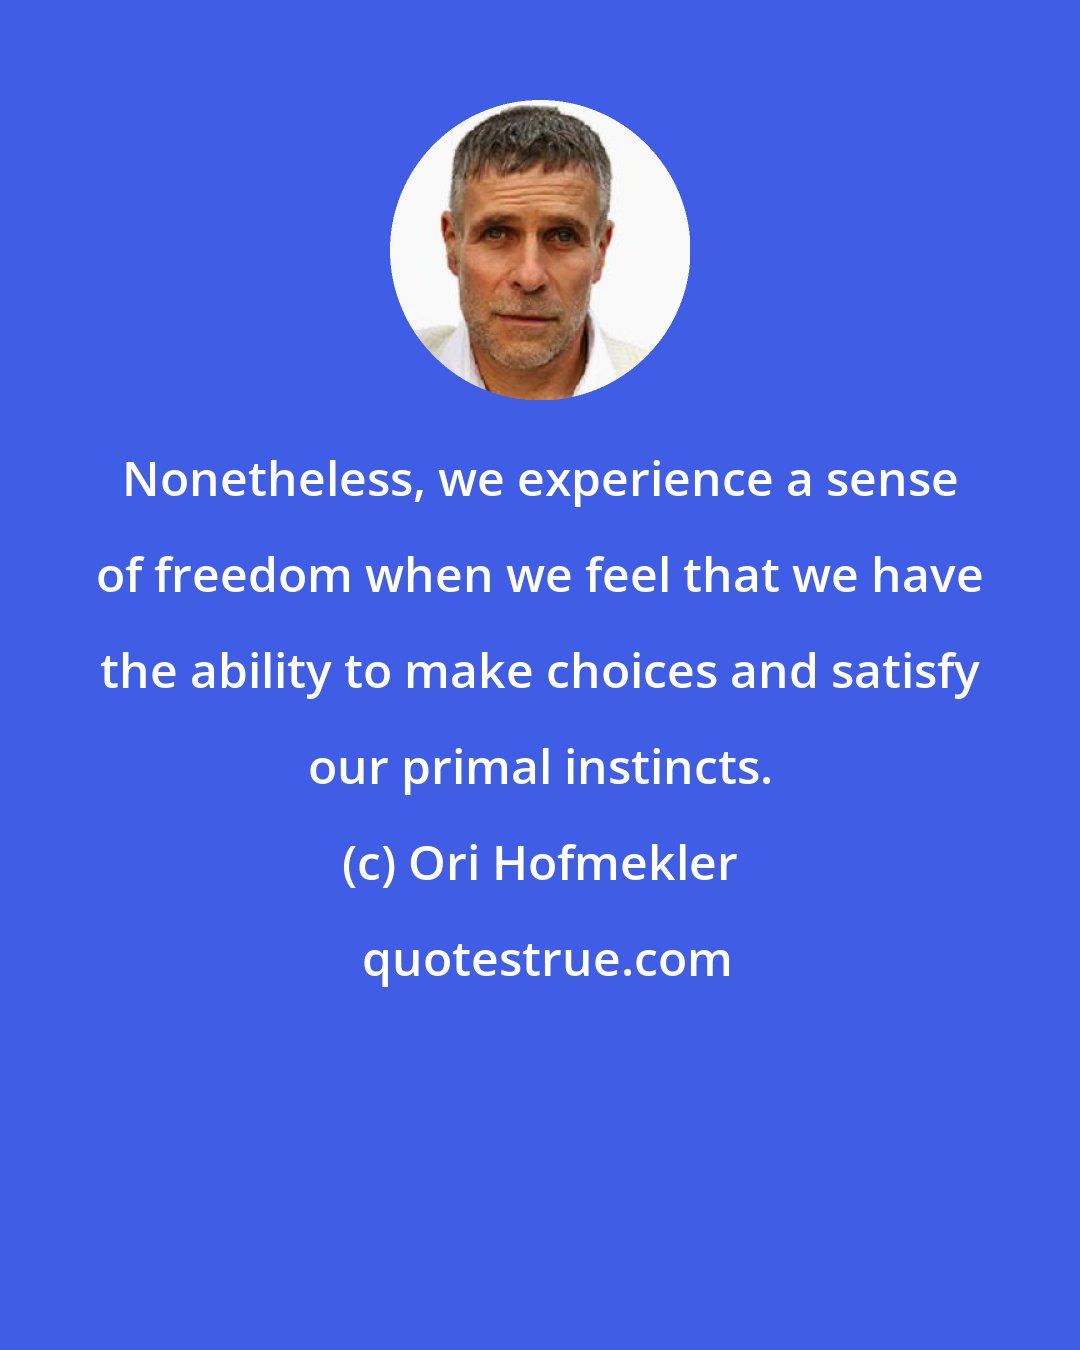 Ori Hofmekler: Nonetheless, we experience a sense of freedom when we feel that we have the ability to make choices and satisfy our primal instincts.